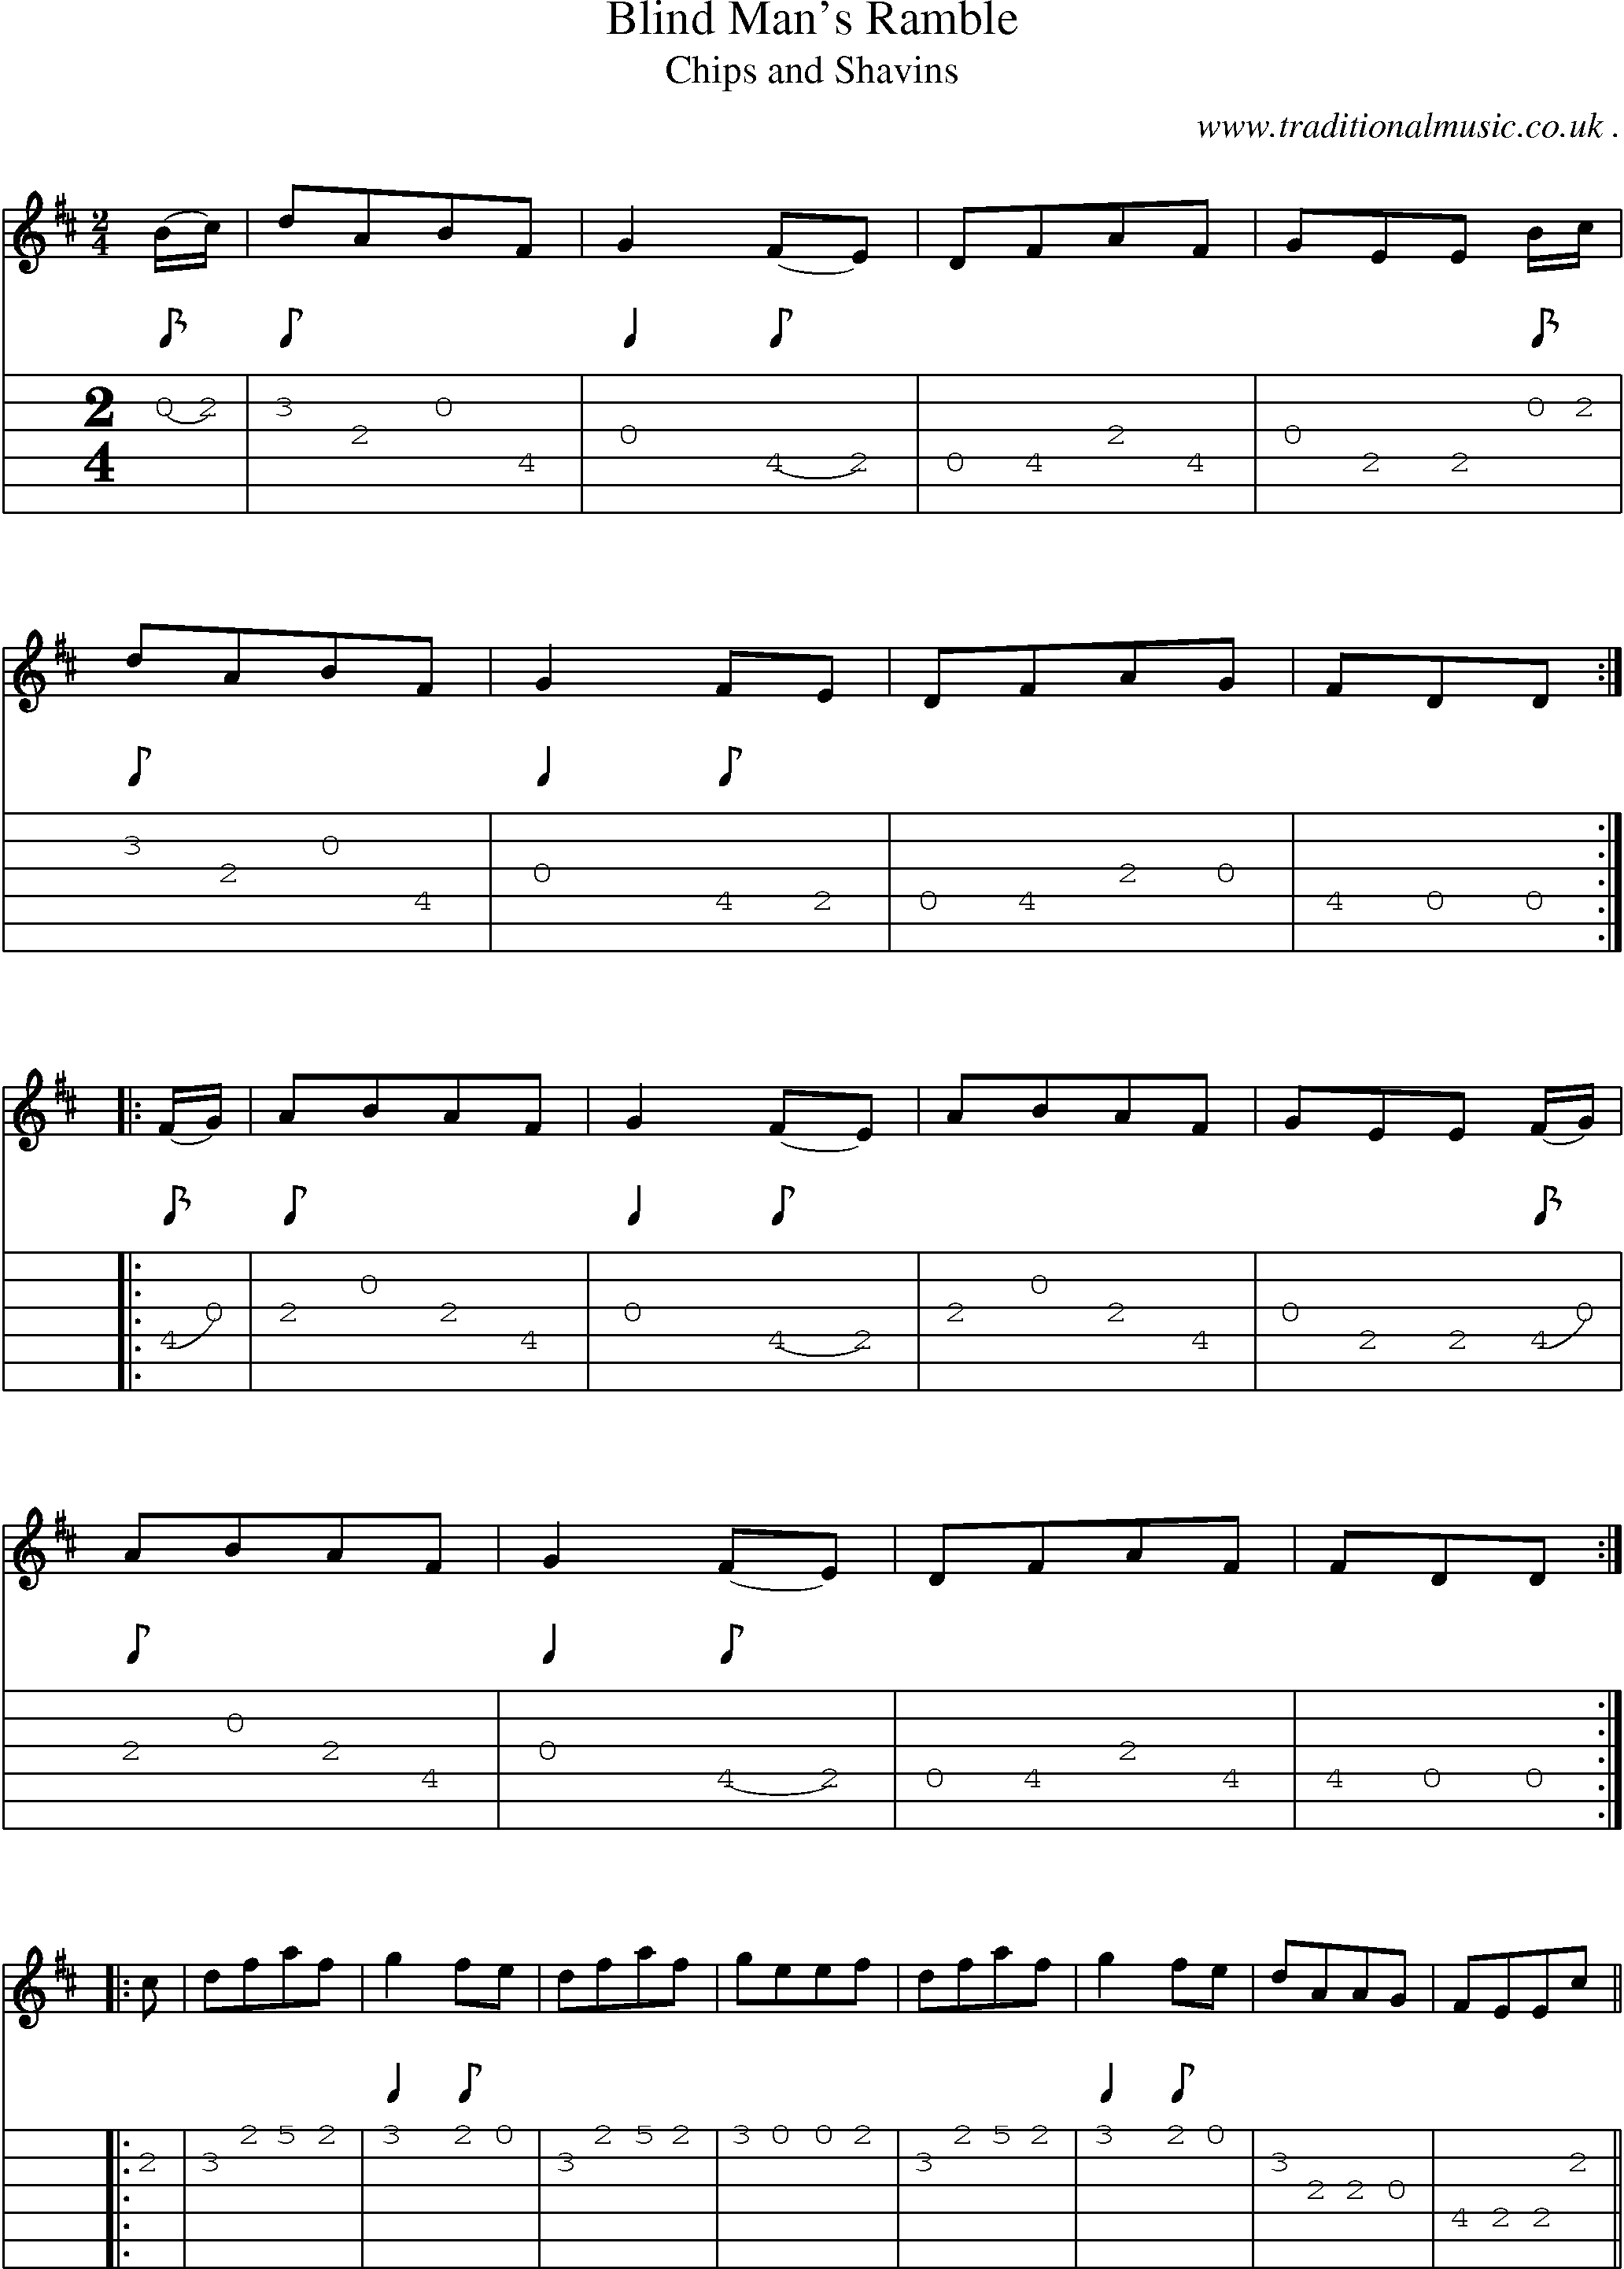 Sheet-Music and Guitar Tabs for Blind Mans Ramble